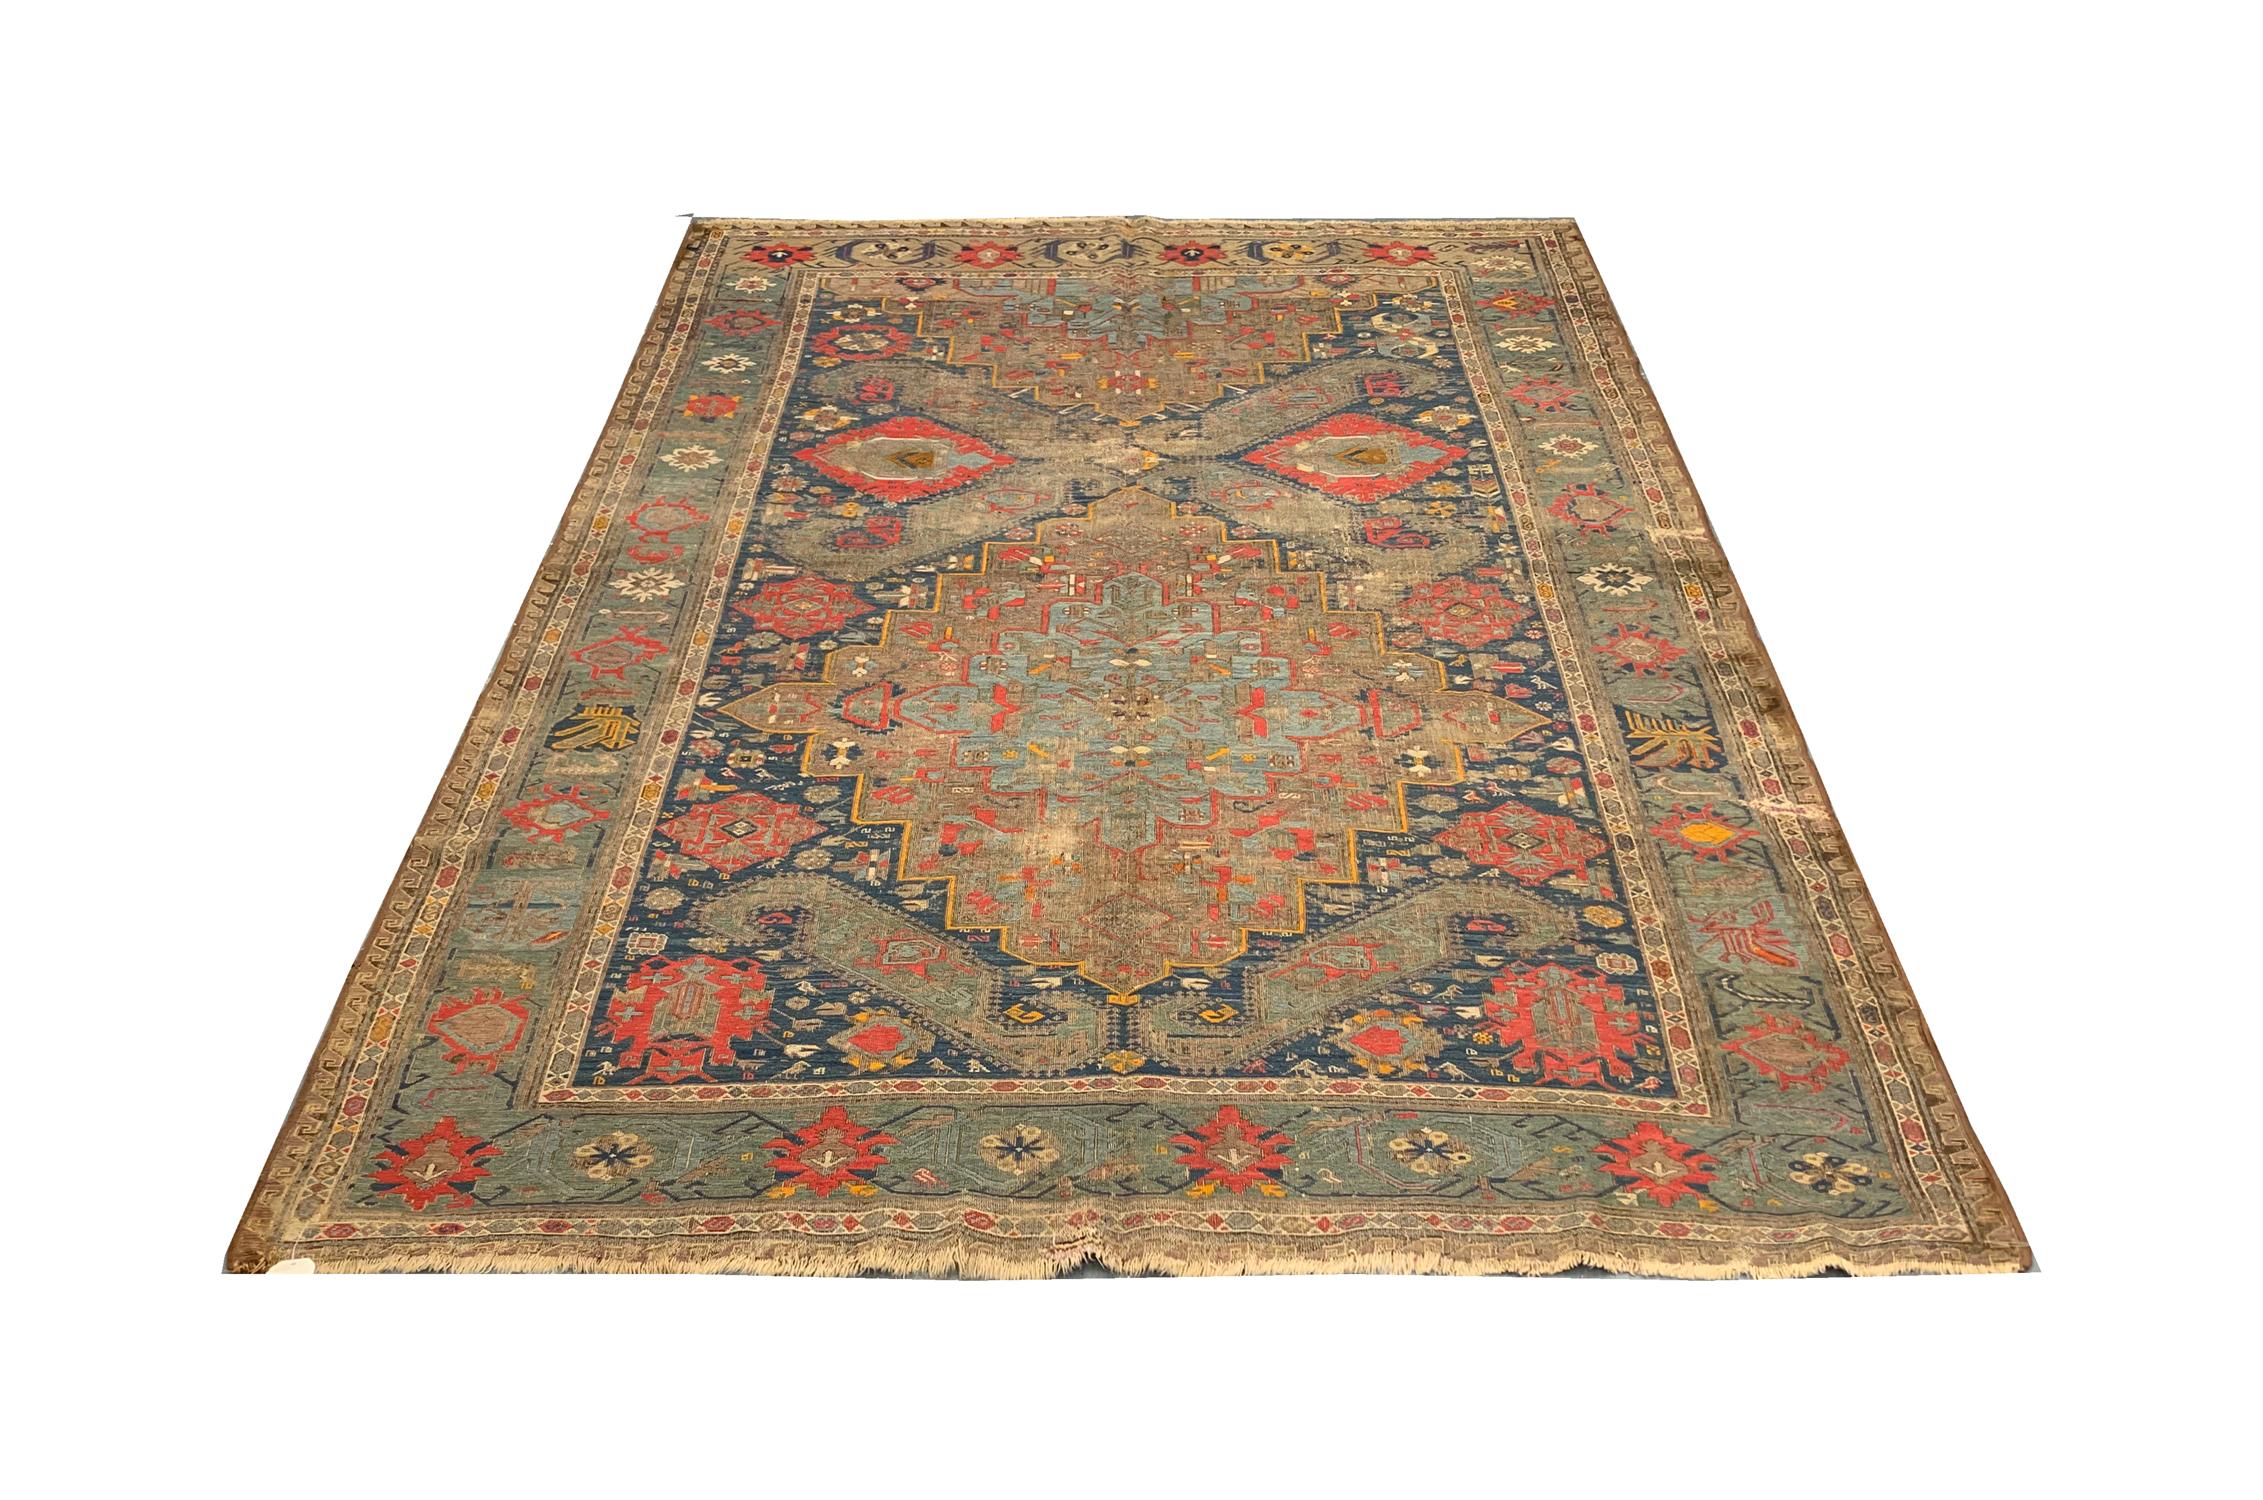 This fine handwoven wool Area Rug was woven in Azerbaijan, Kuba, in the 1880s. The central design has been woven with a Grande medallion, woven with accents of blue, beige, red and ivory. The colour palette and design in this piece make it the